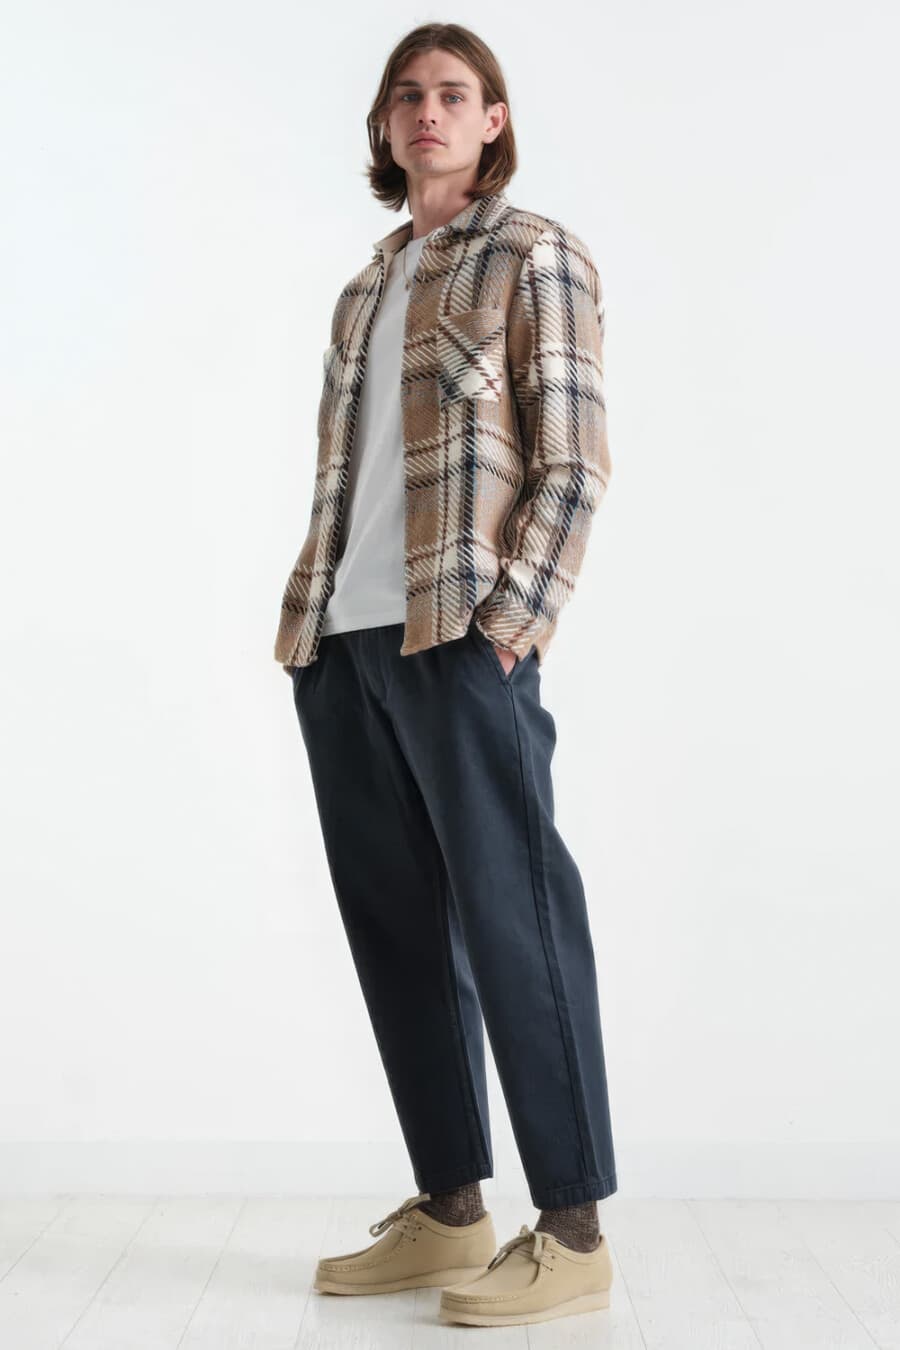 Men's loose, cropped navy pants, white T-shirt, brown check flannel overshirt, brown socks and beige suede Wallabee shoes outfit